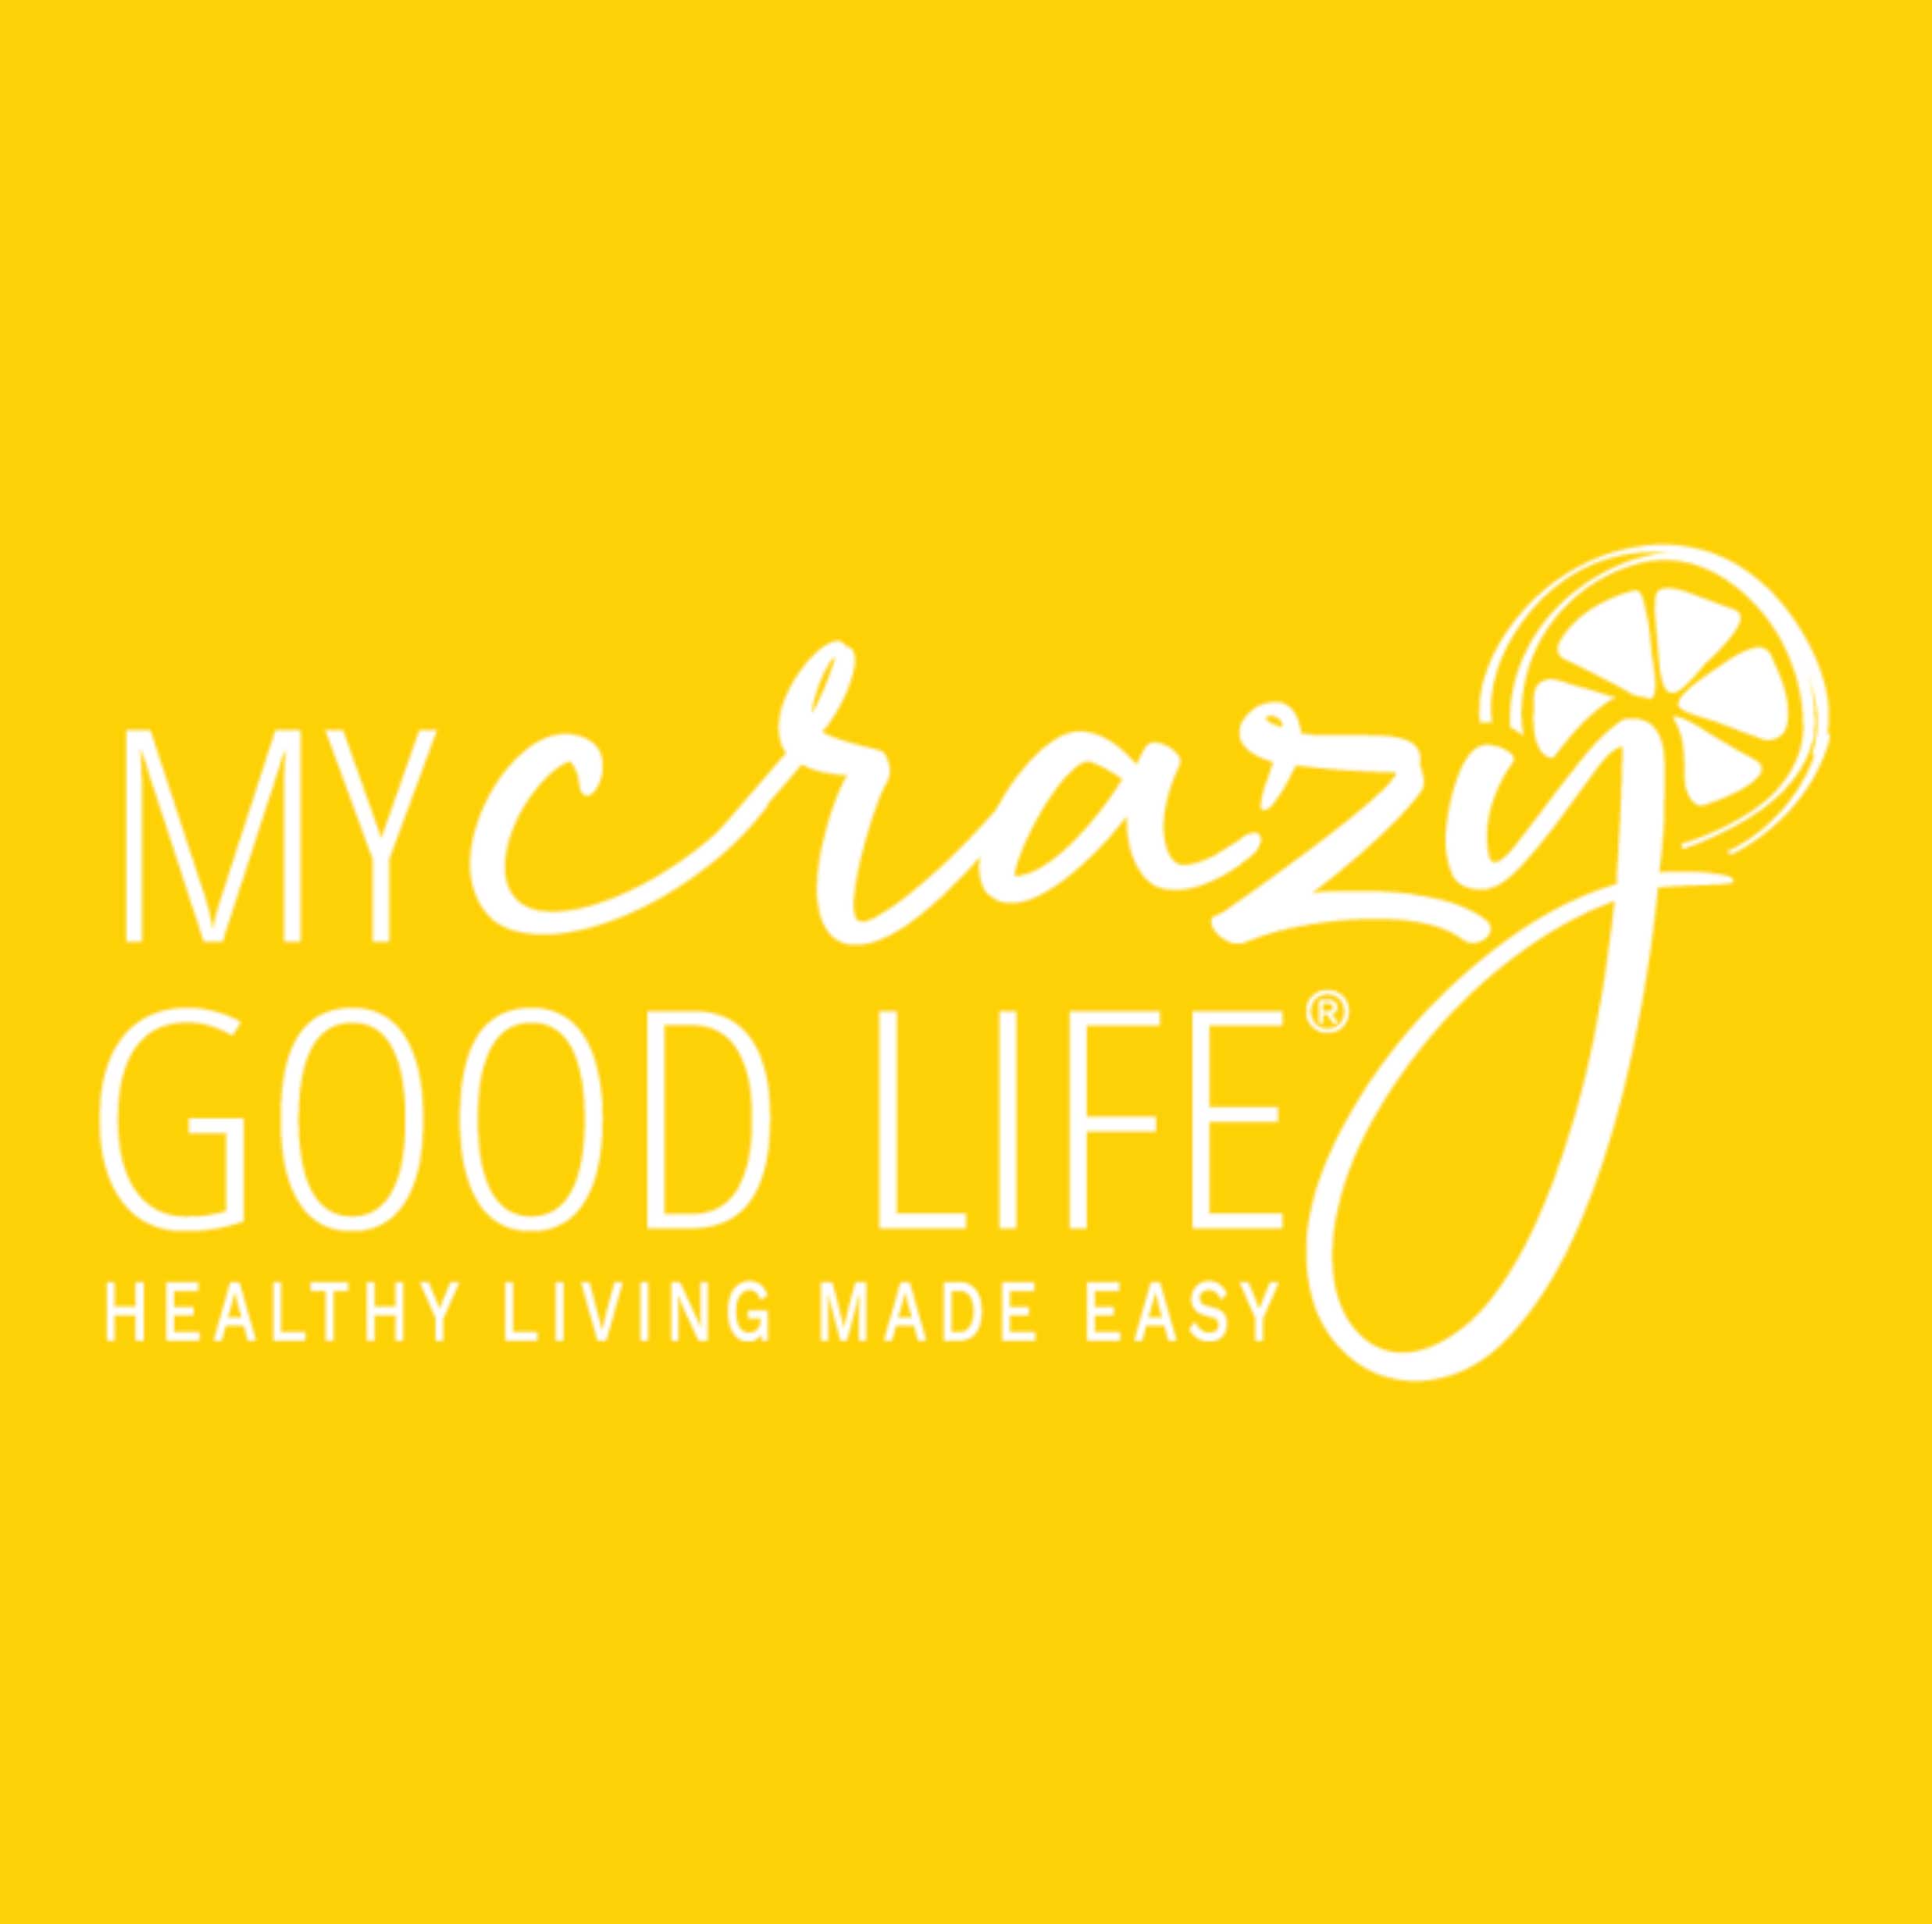 21 Day Fix Family Meal Plan : My Crazy Good Life